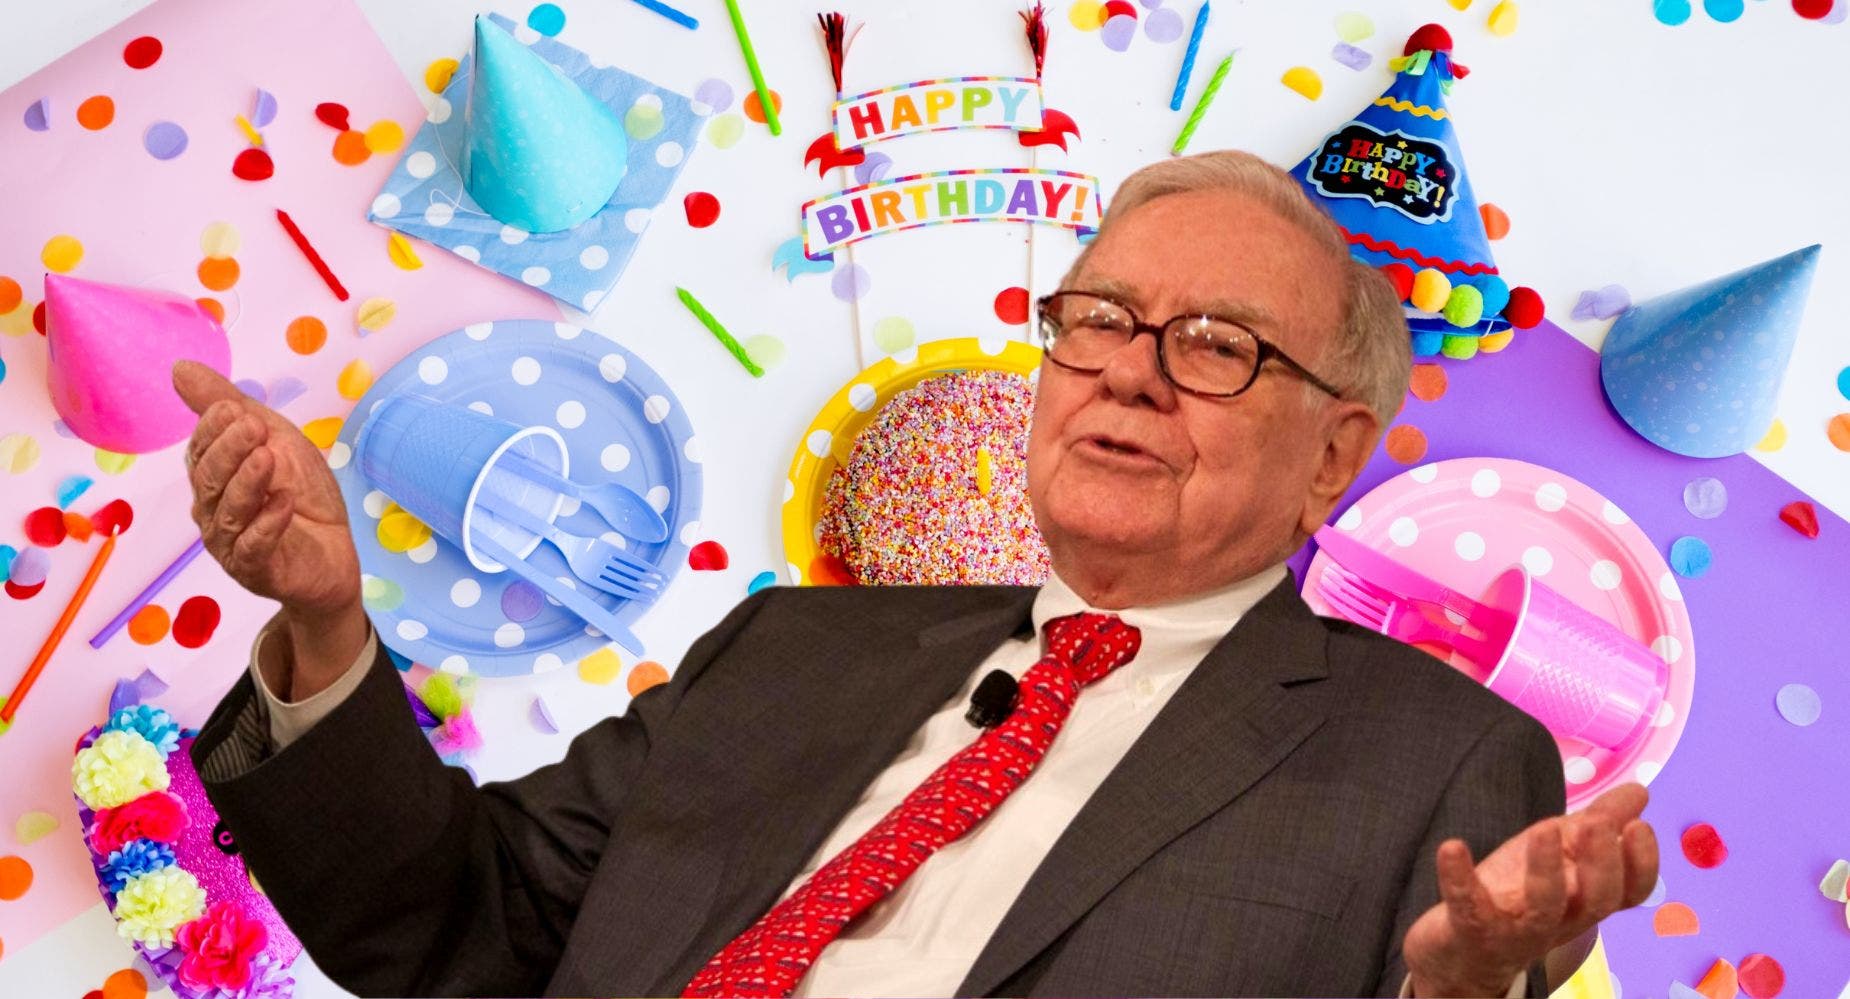 As Warren Buffett Turns 92, Here's How His Top 3 Holdings Did Since His Last Birthday